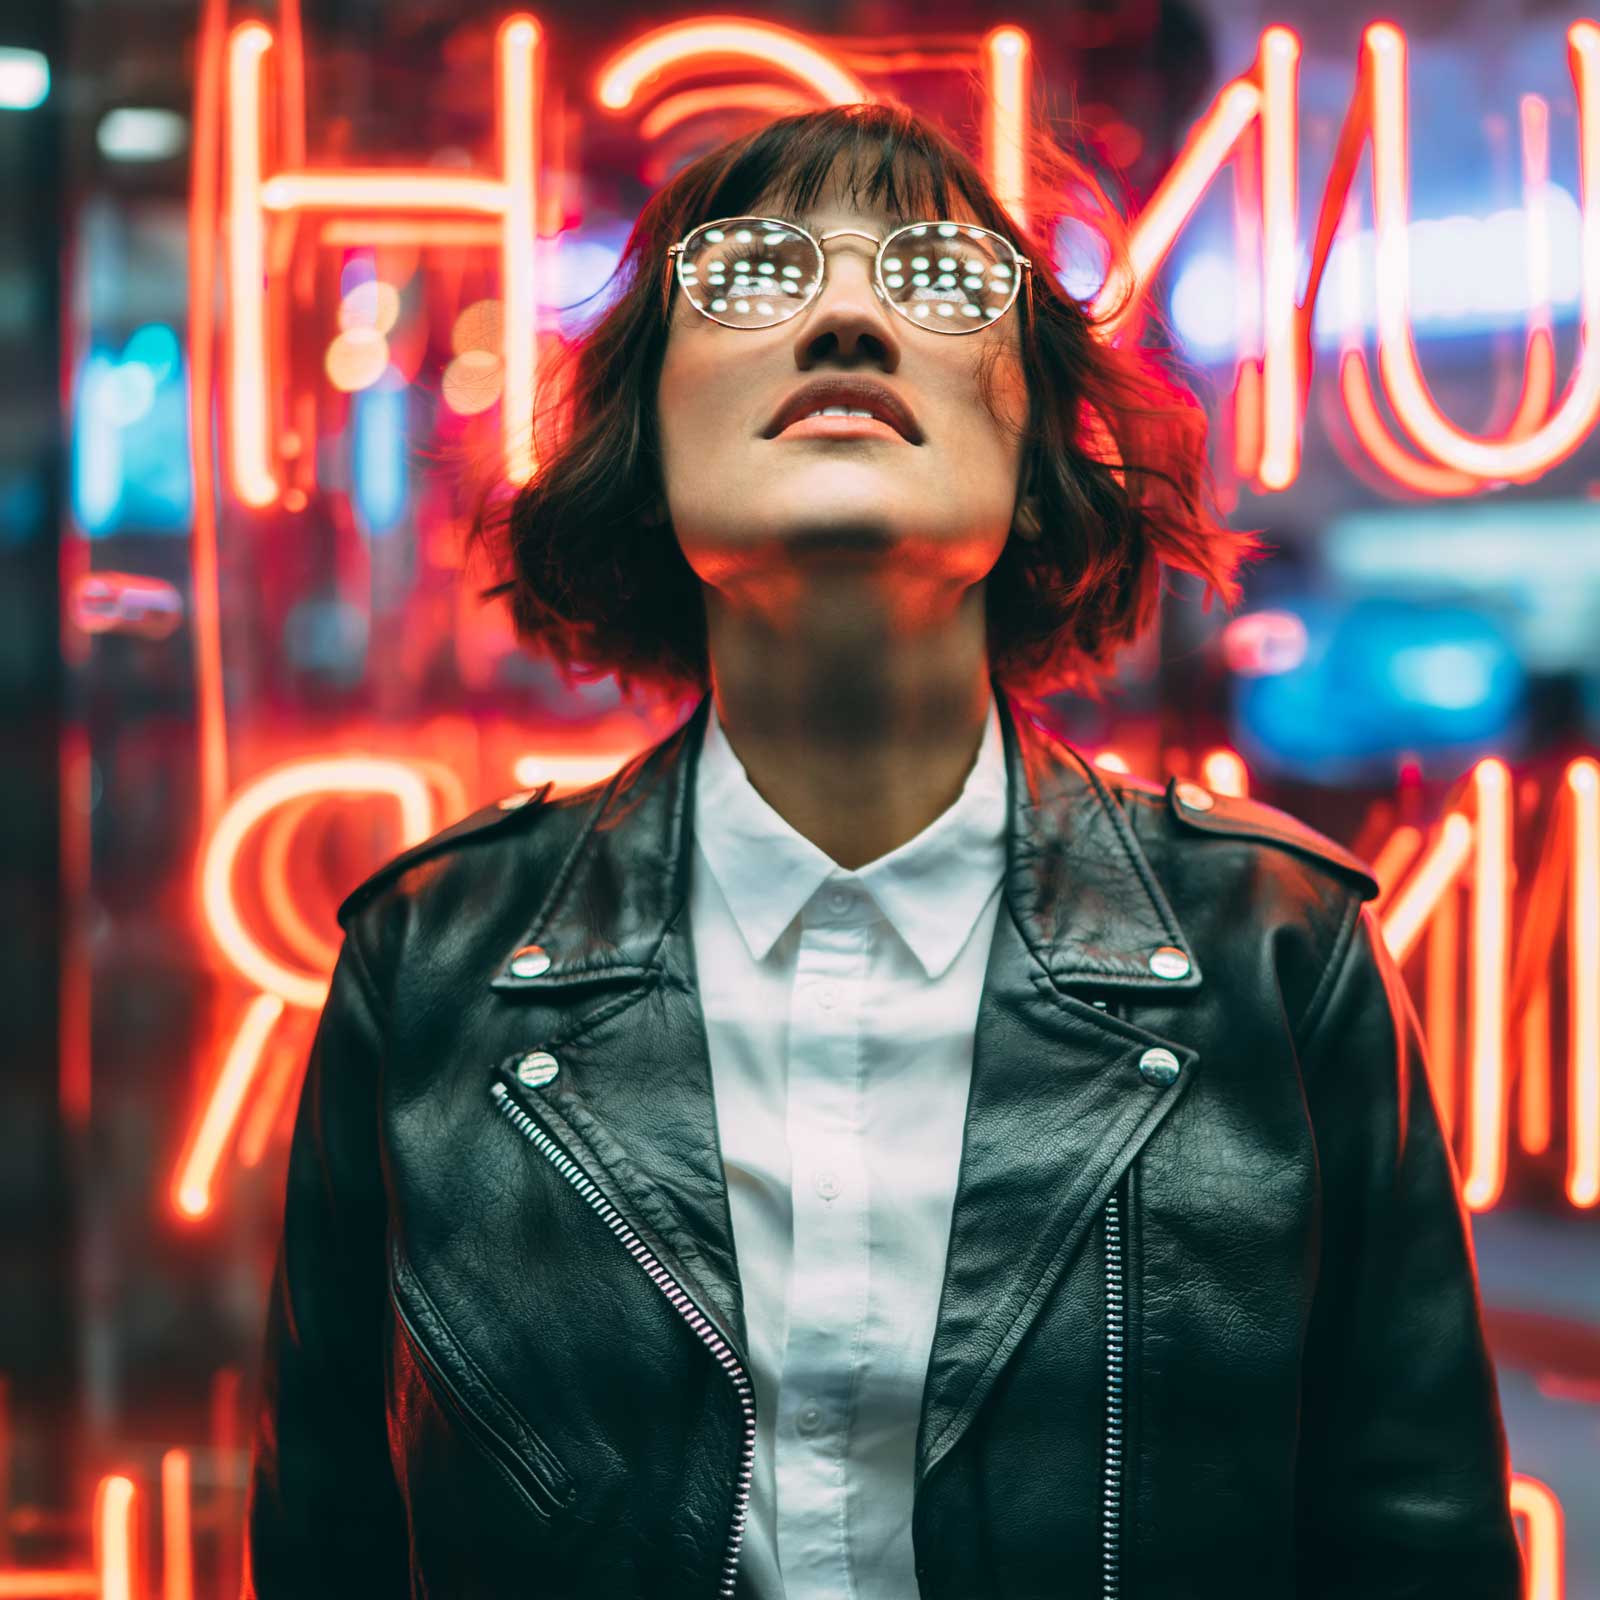 Person wearing glasses and a leather jacket looking up and standing in front of red neon lights